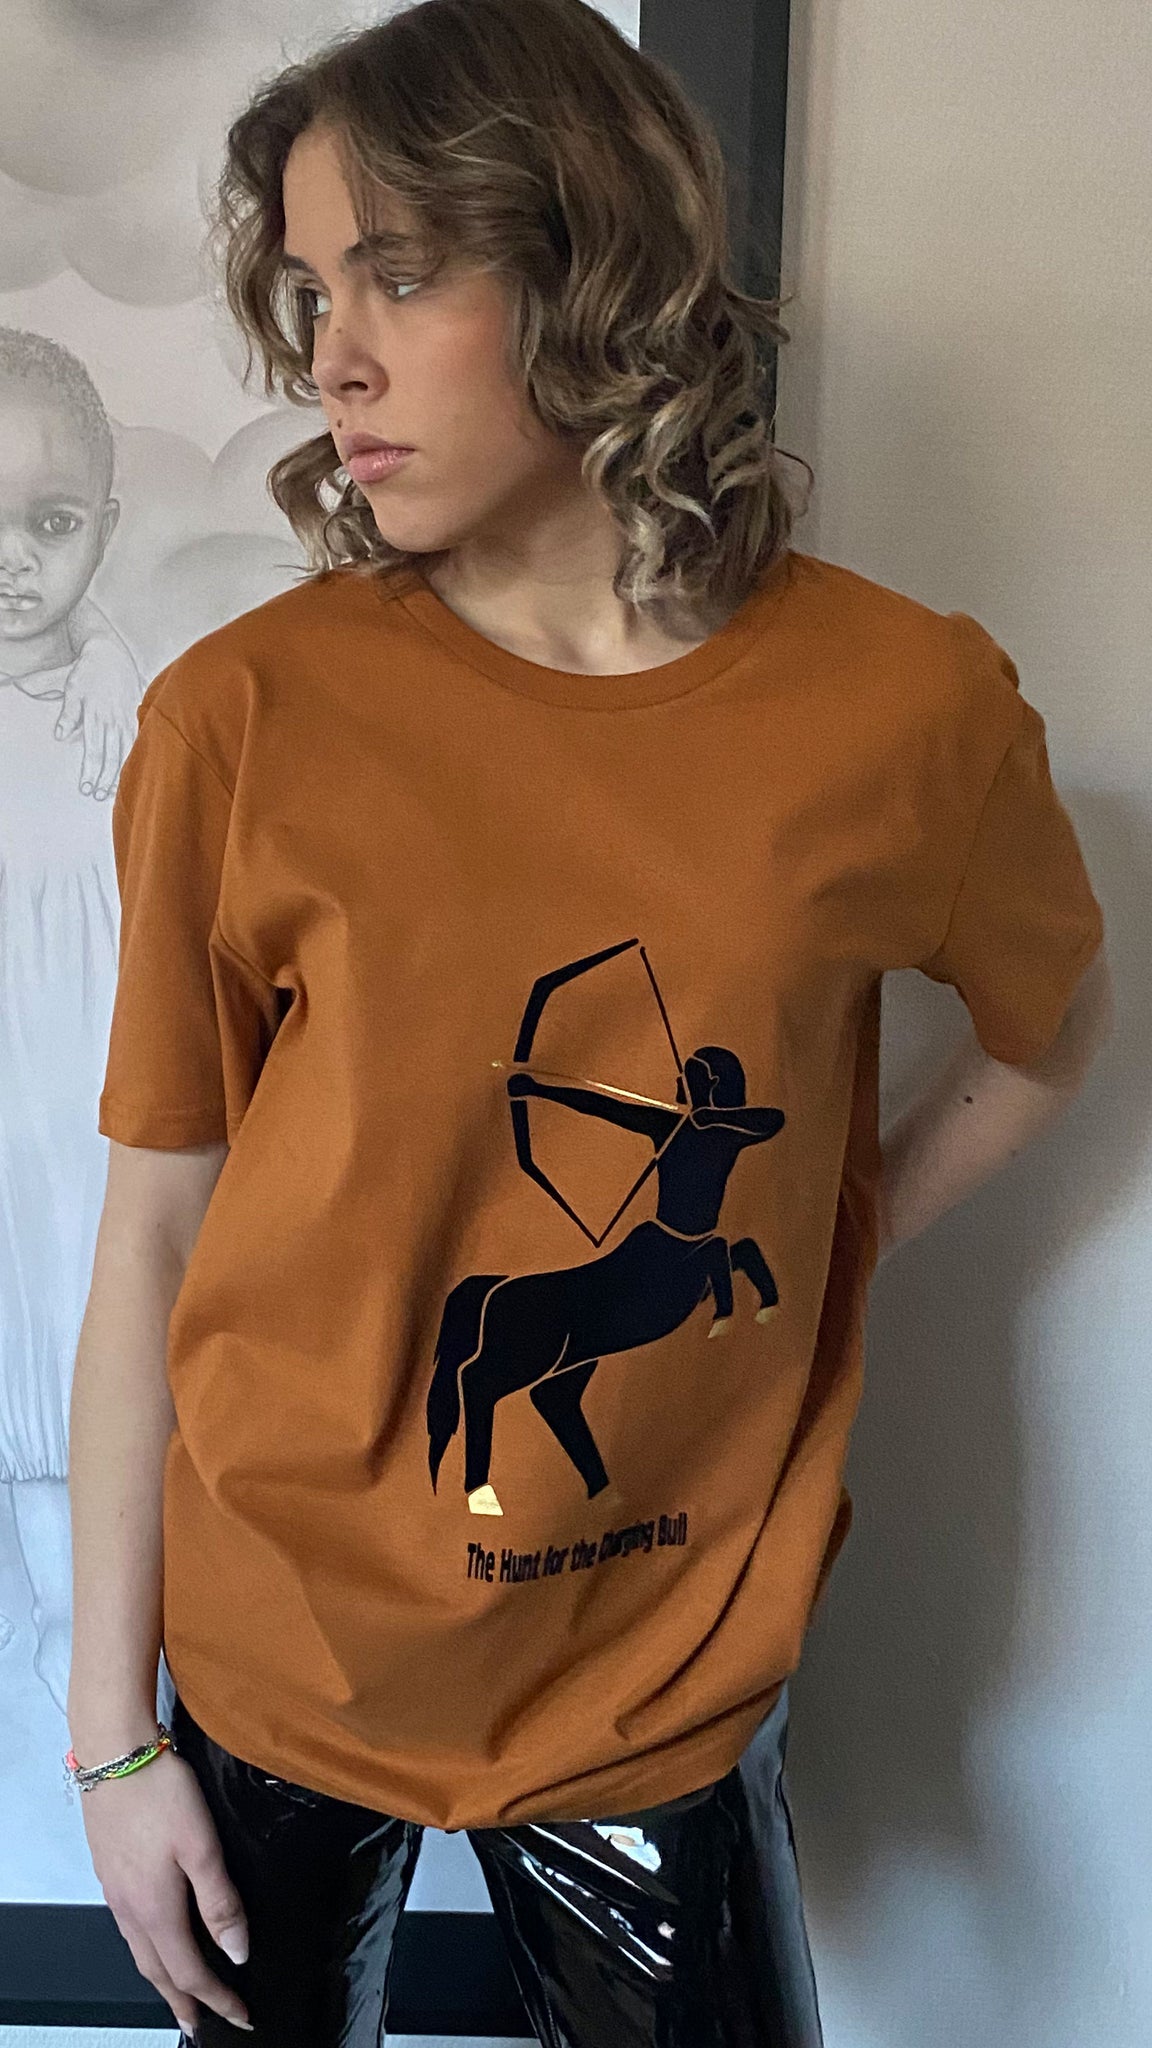 Vegan Approved, saffron yellow/orange heist T-shirt “The Hunt for the Charging Bull” is a metaphor for hunting down the extreme forms of Capitalism existing nowadays. By Atelier Astrid & Antoinette